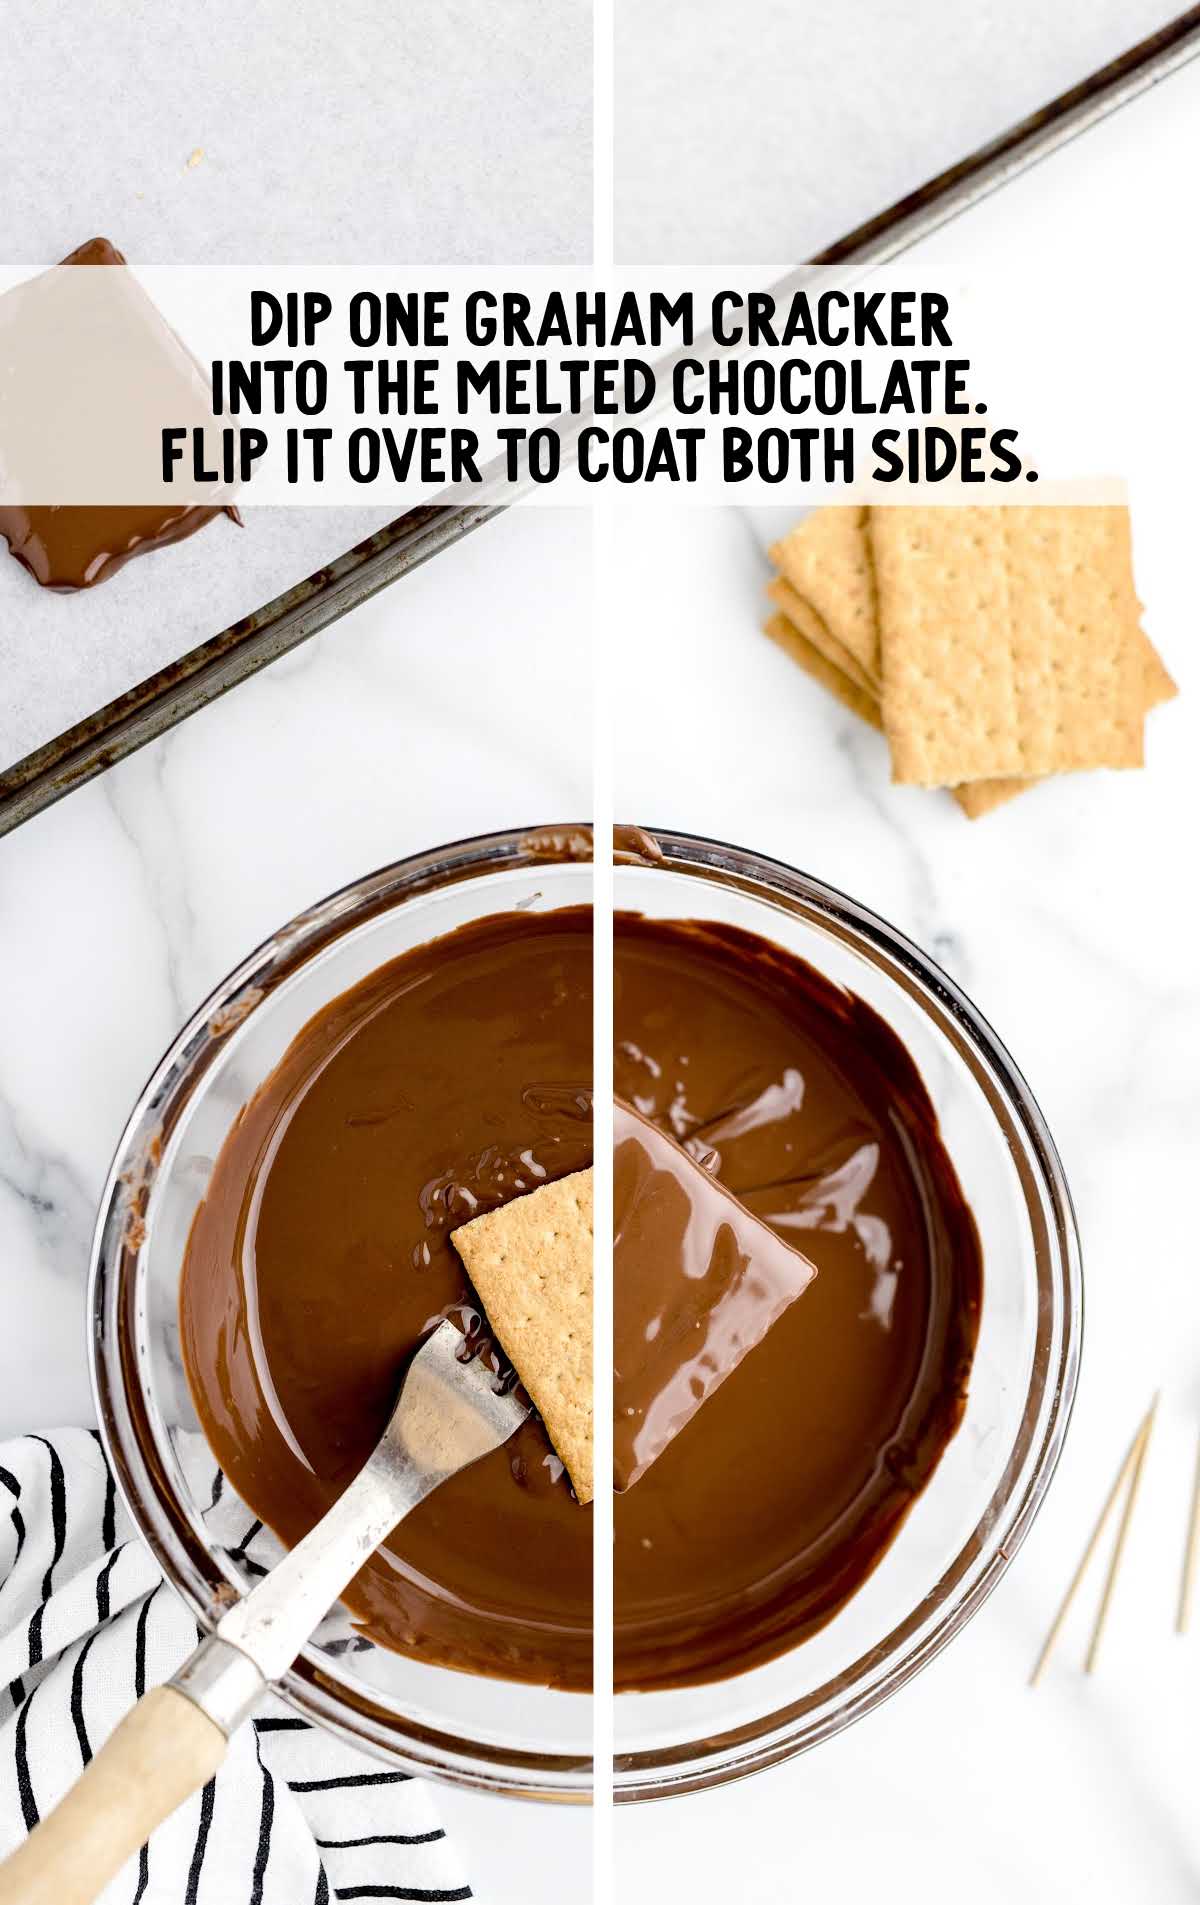 graham crackers dipped into melted chocolate